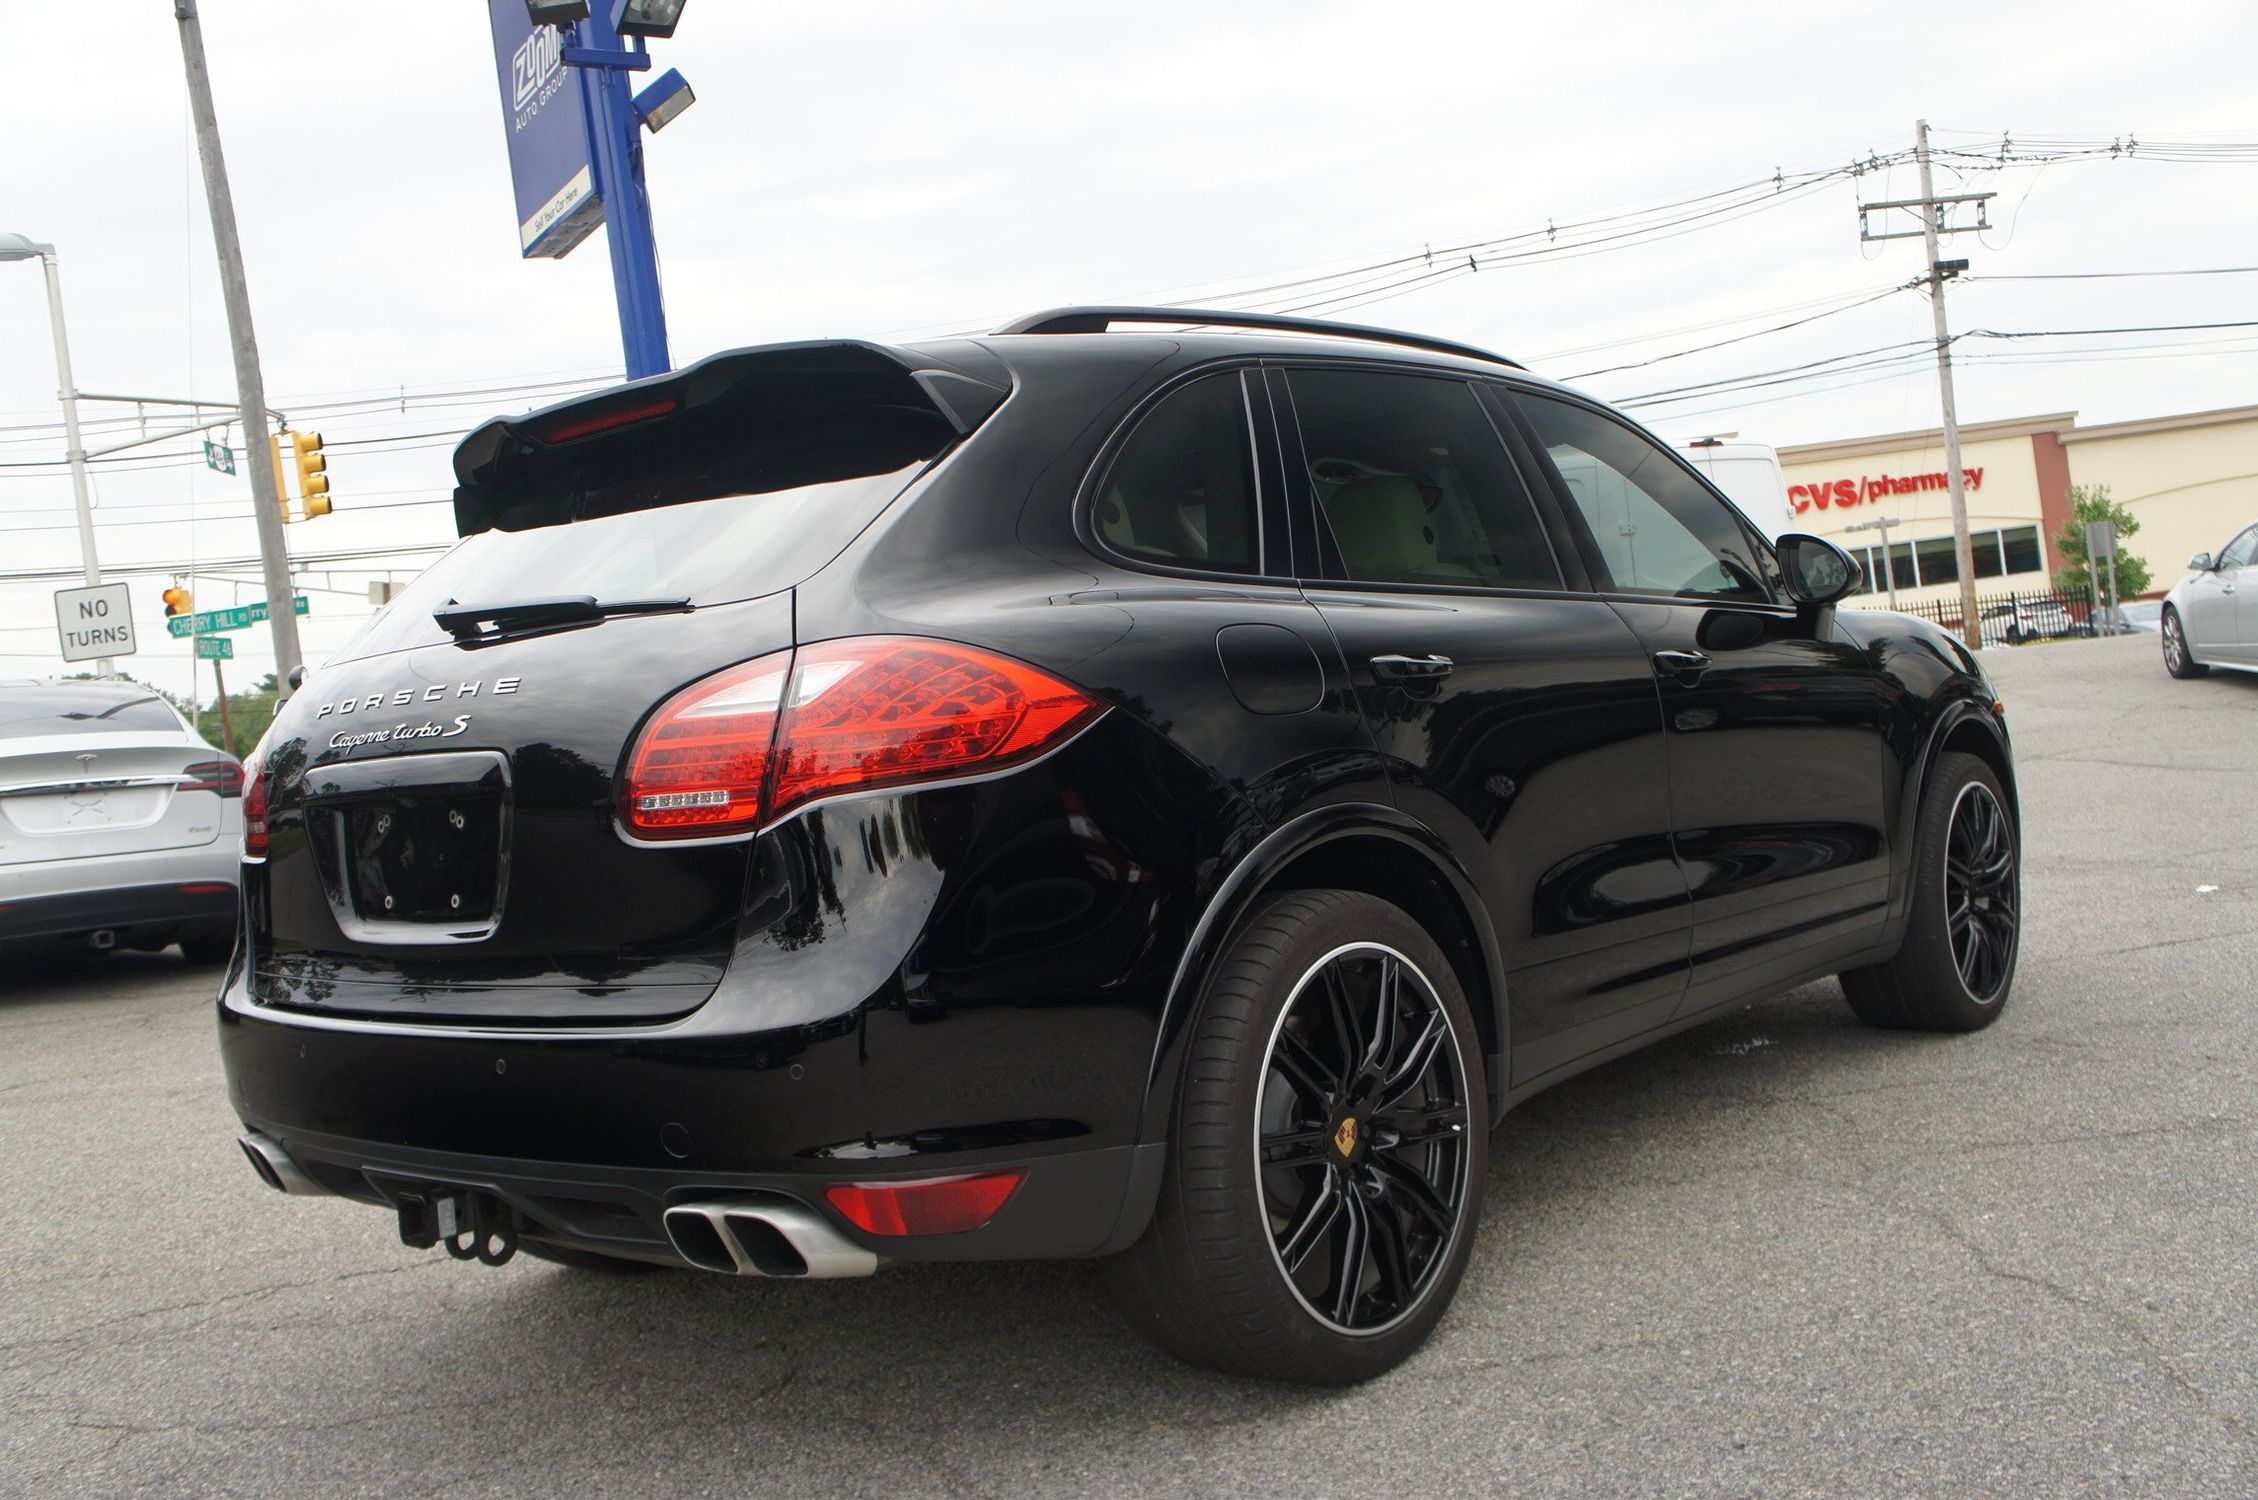 2014 Porsche Cayenne Turbo S | Zoom Auto Group - Used Cars New Jersey